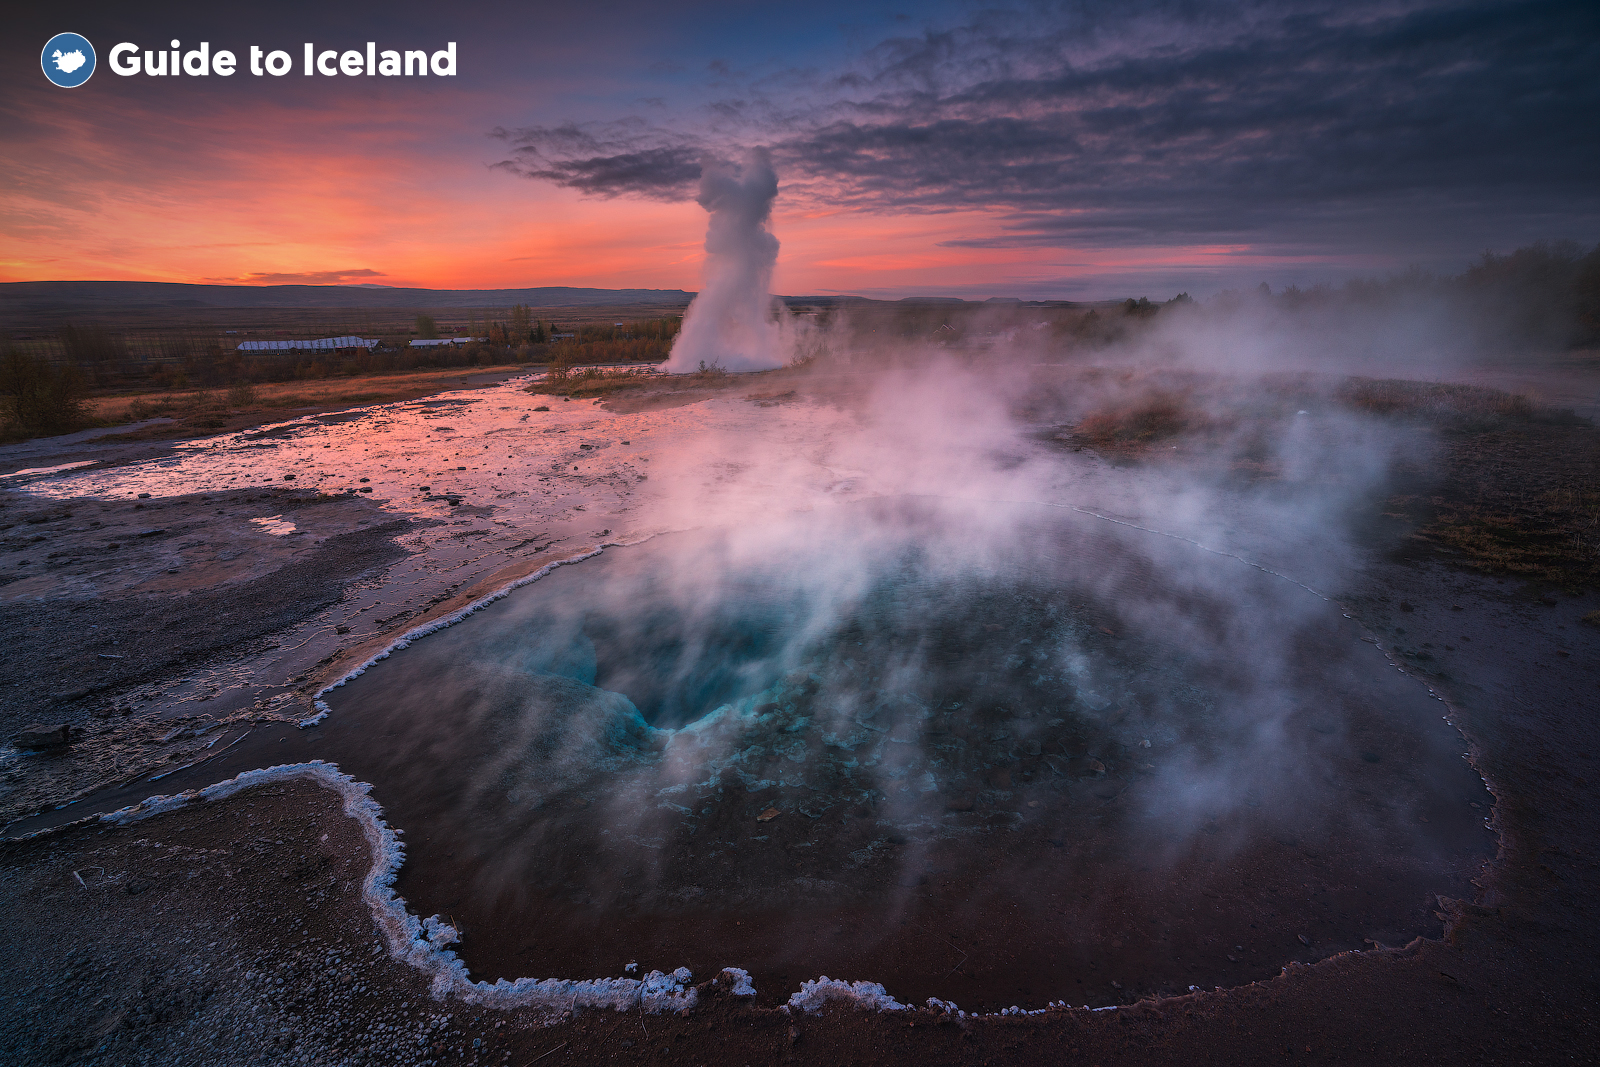 Strokkur is a geyser on the famous Golden Circle sightseeing route. It erupts every 5 to 8 minutes.